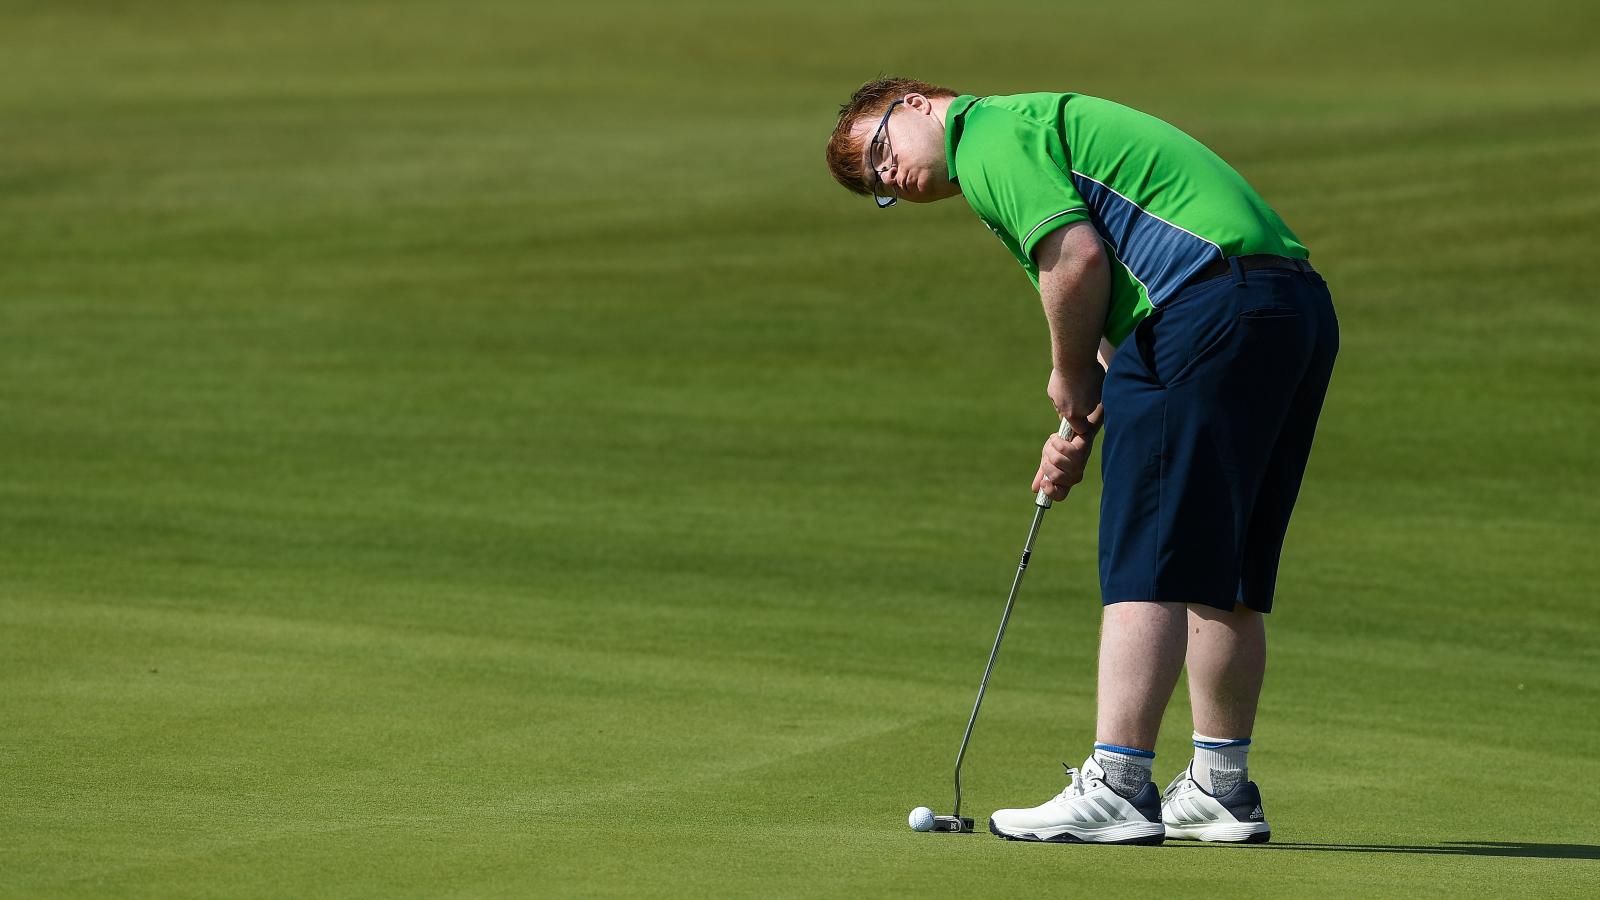 Special Olympics athlete holding golf club and putting on the green.